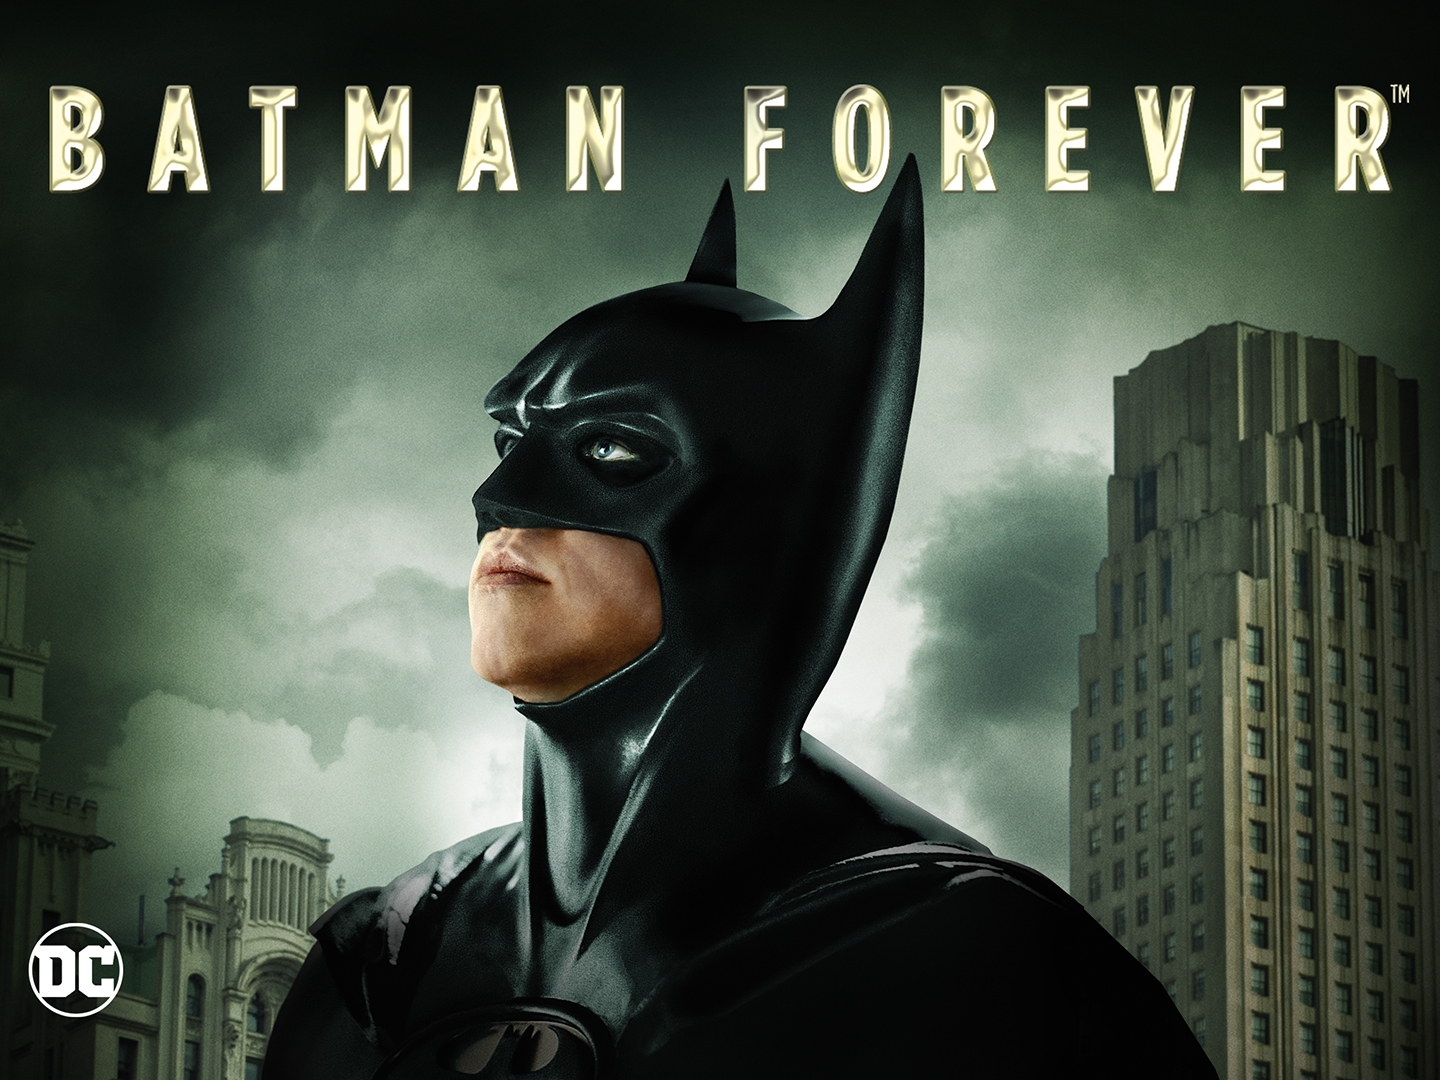 Watch Batman Forever Online with NEON